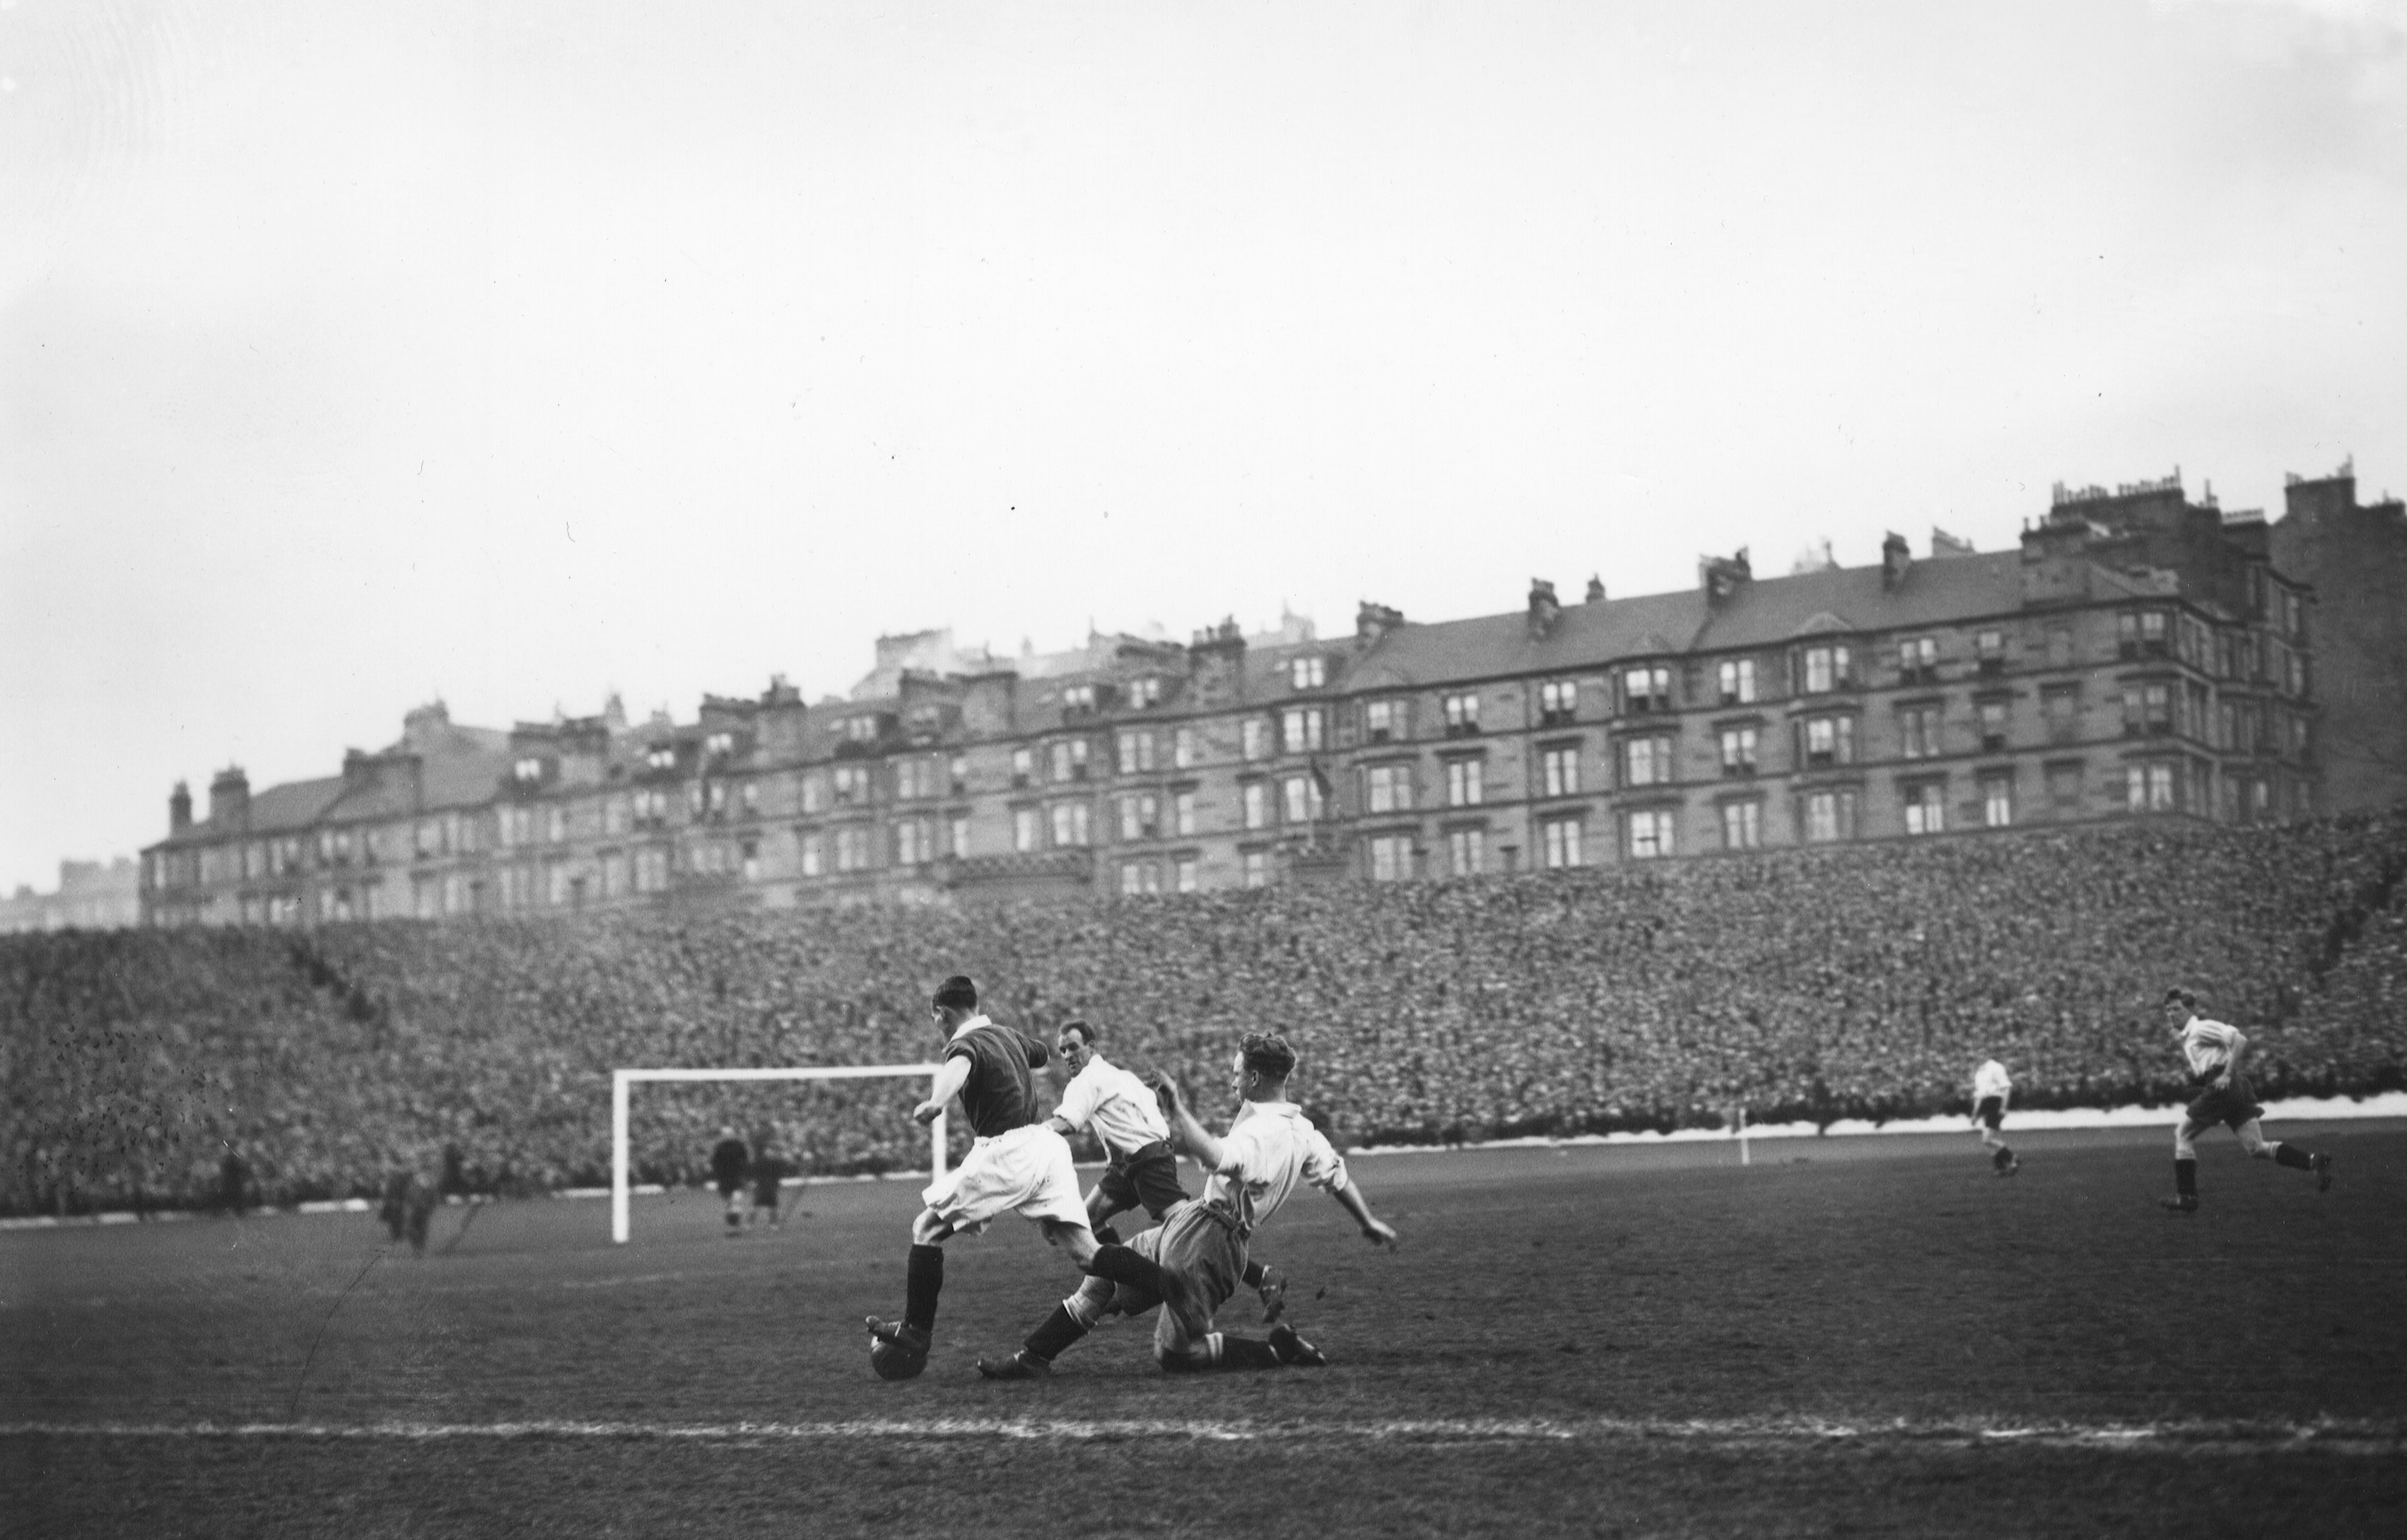 In 1923, six years before the Hampden Roar was born, Scotland drew 2-2 with England at Hampden.